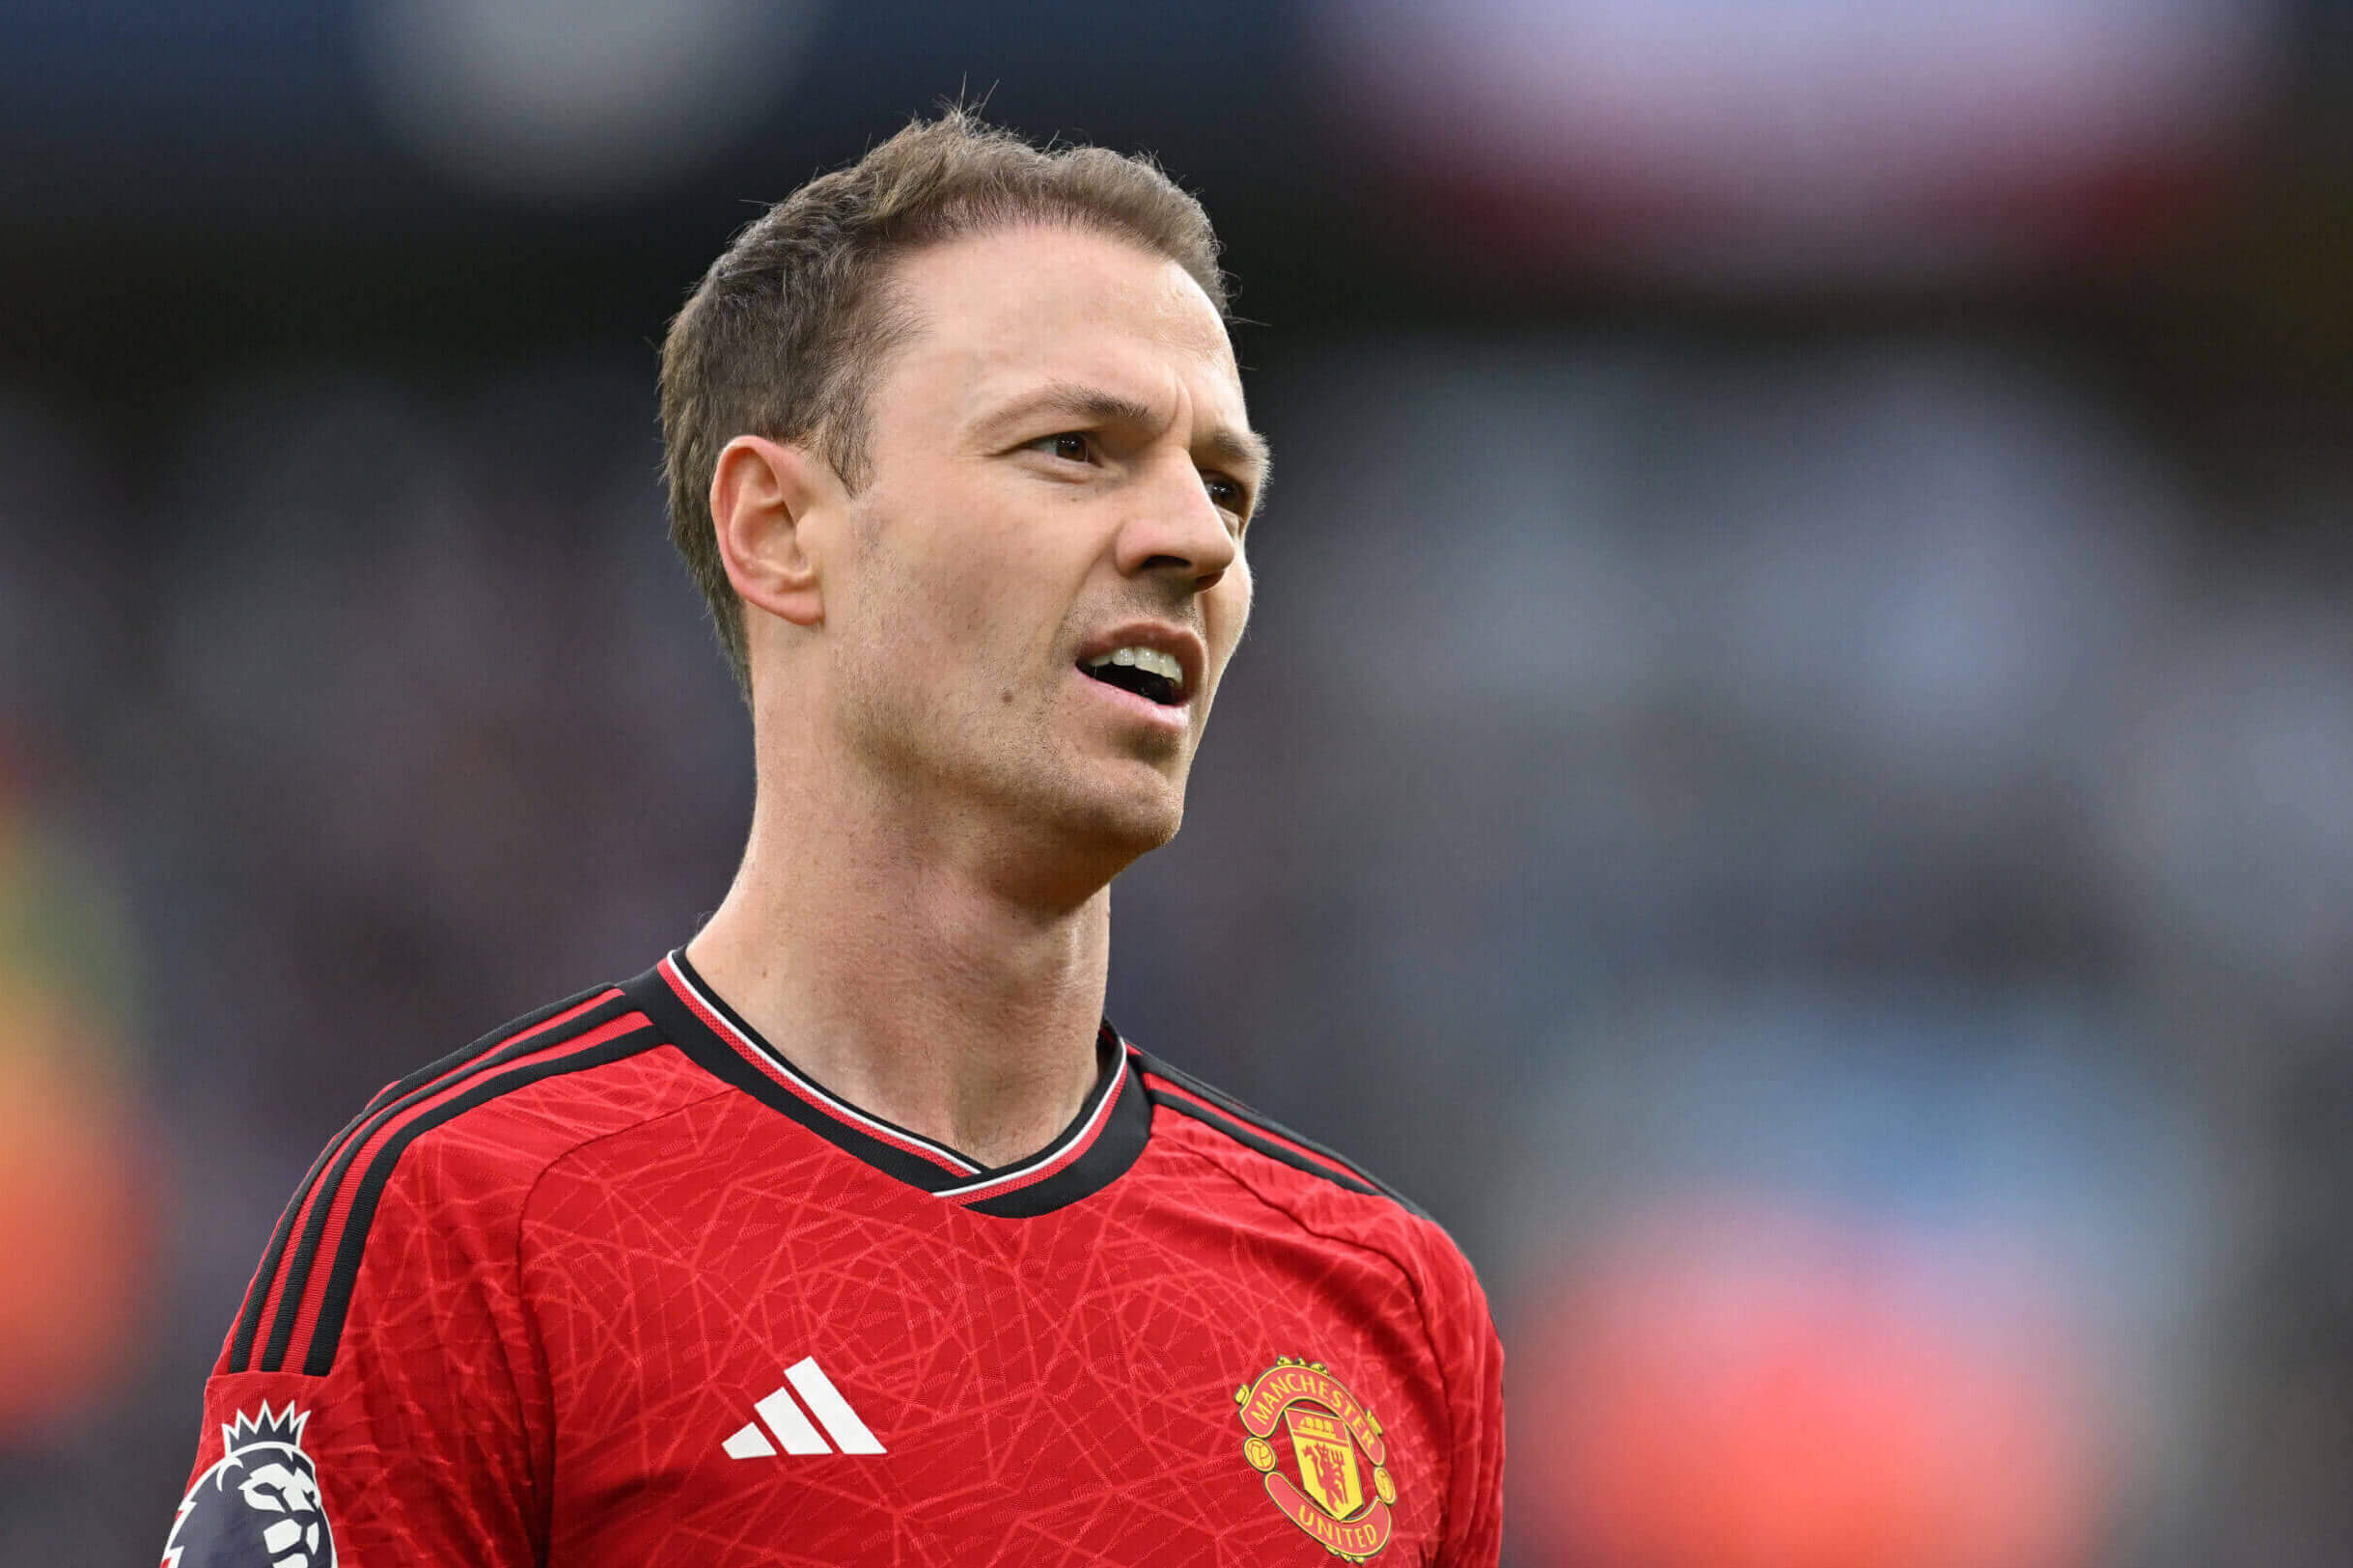 Jonny Evans on his surprise Manchester United return and what winning the FA Cup would mean to him